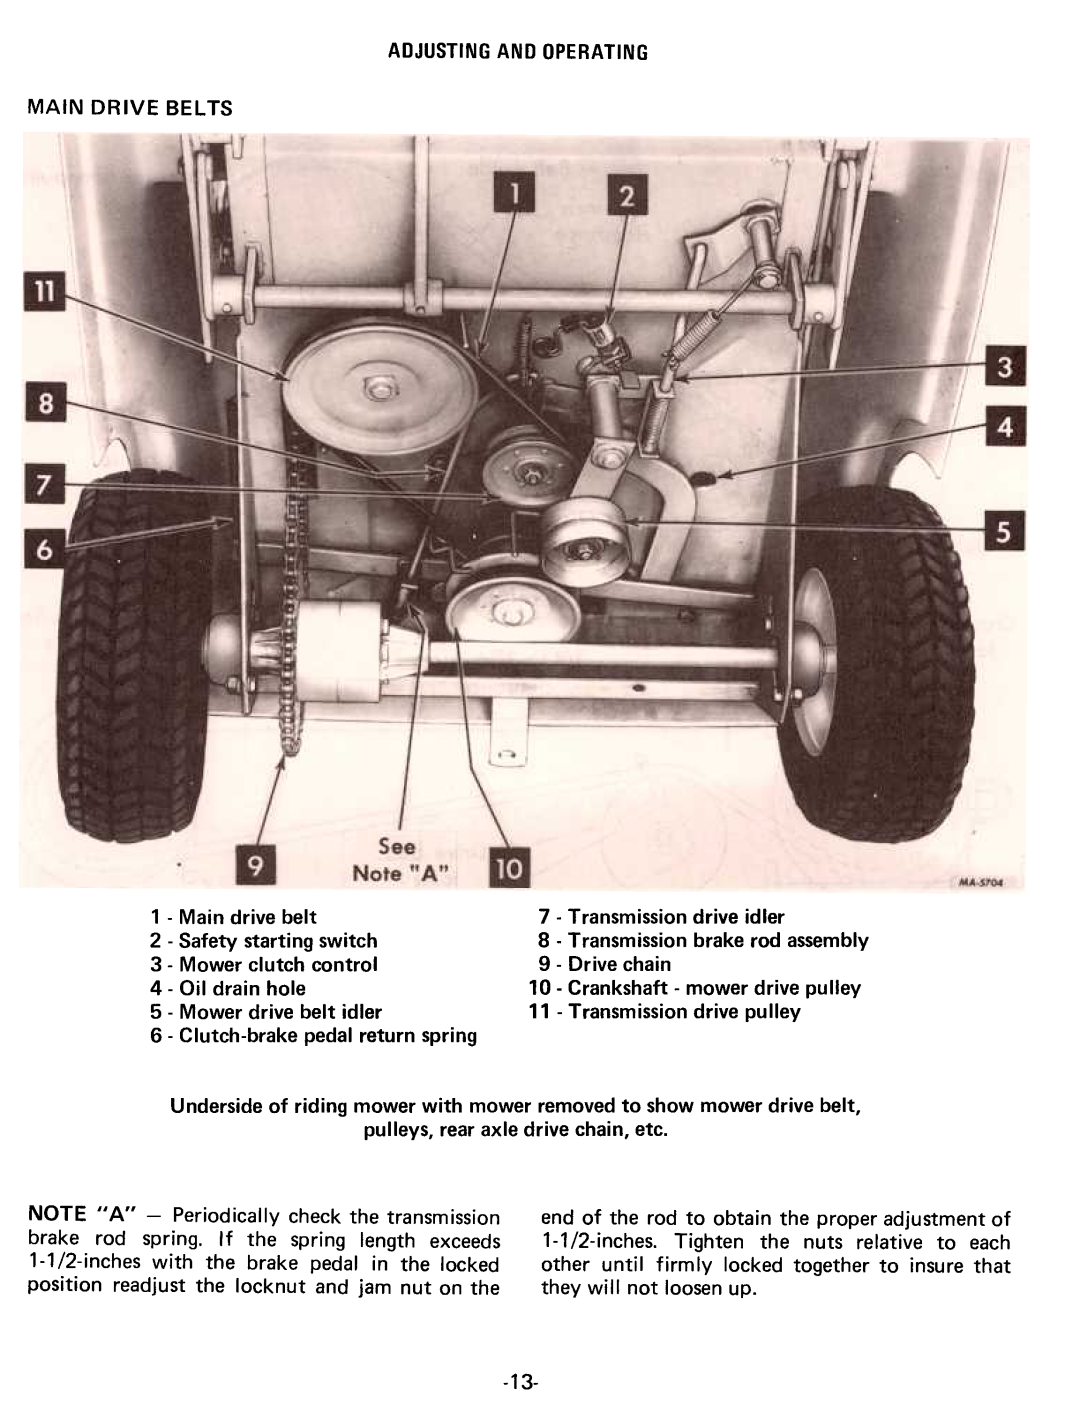 Cub Cadet 75 manual NOTE II A II -Period ically check the transm ission 